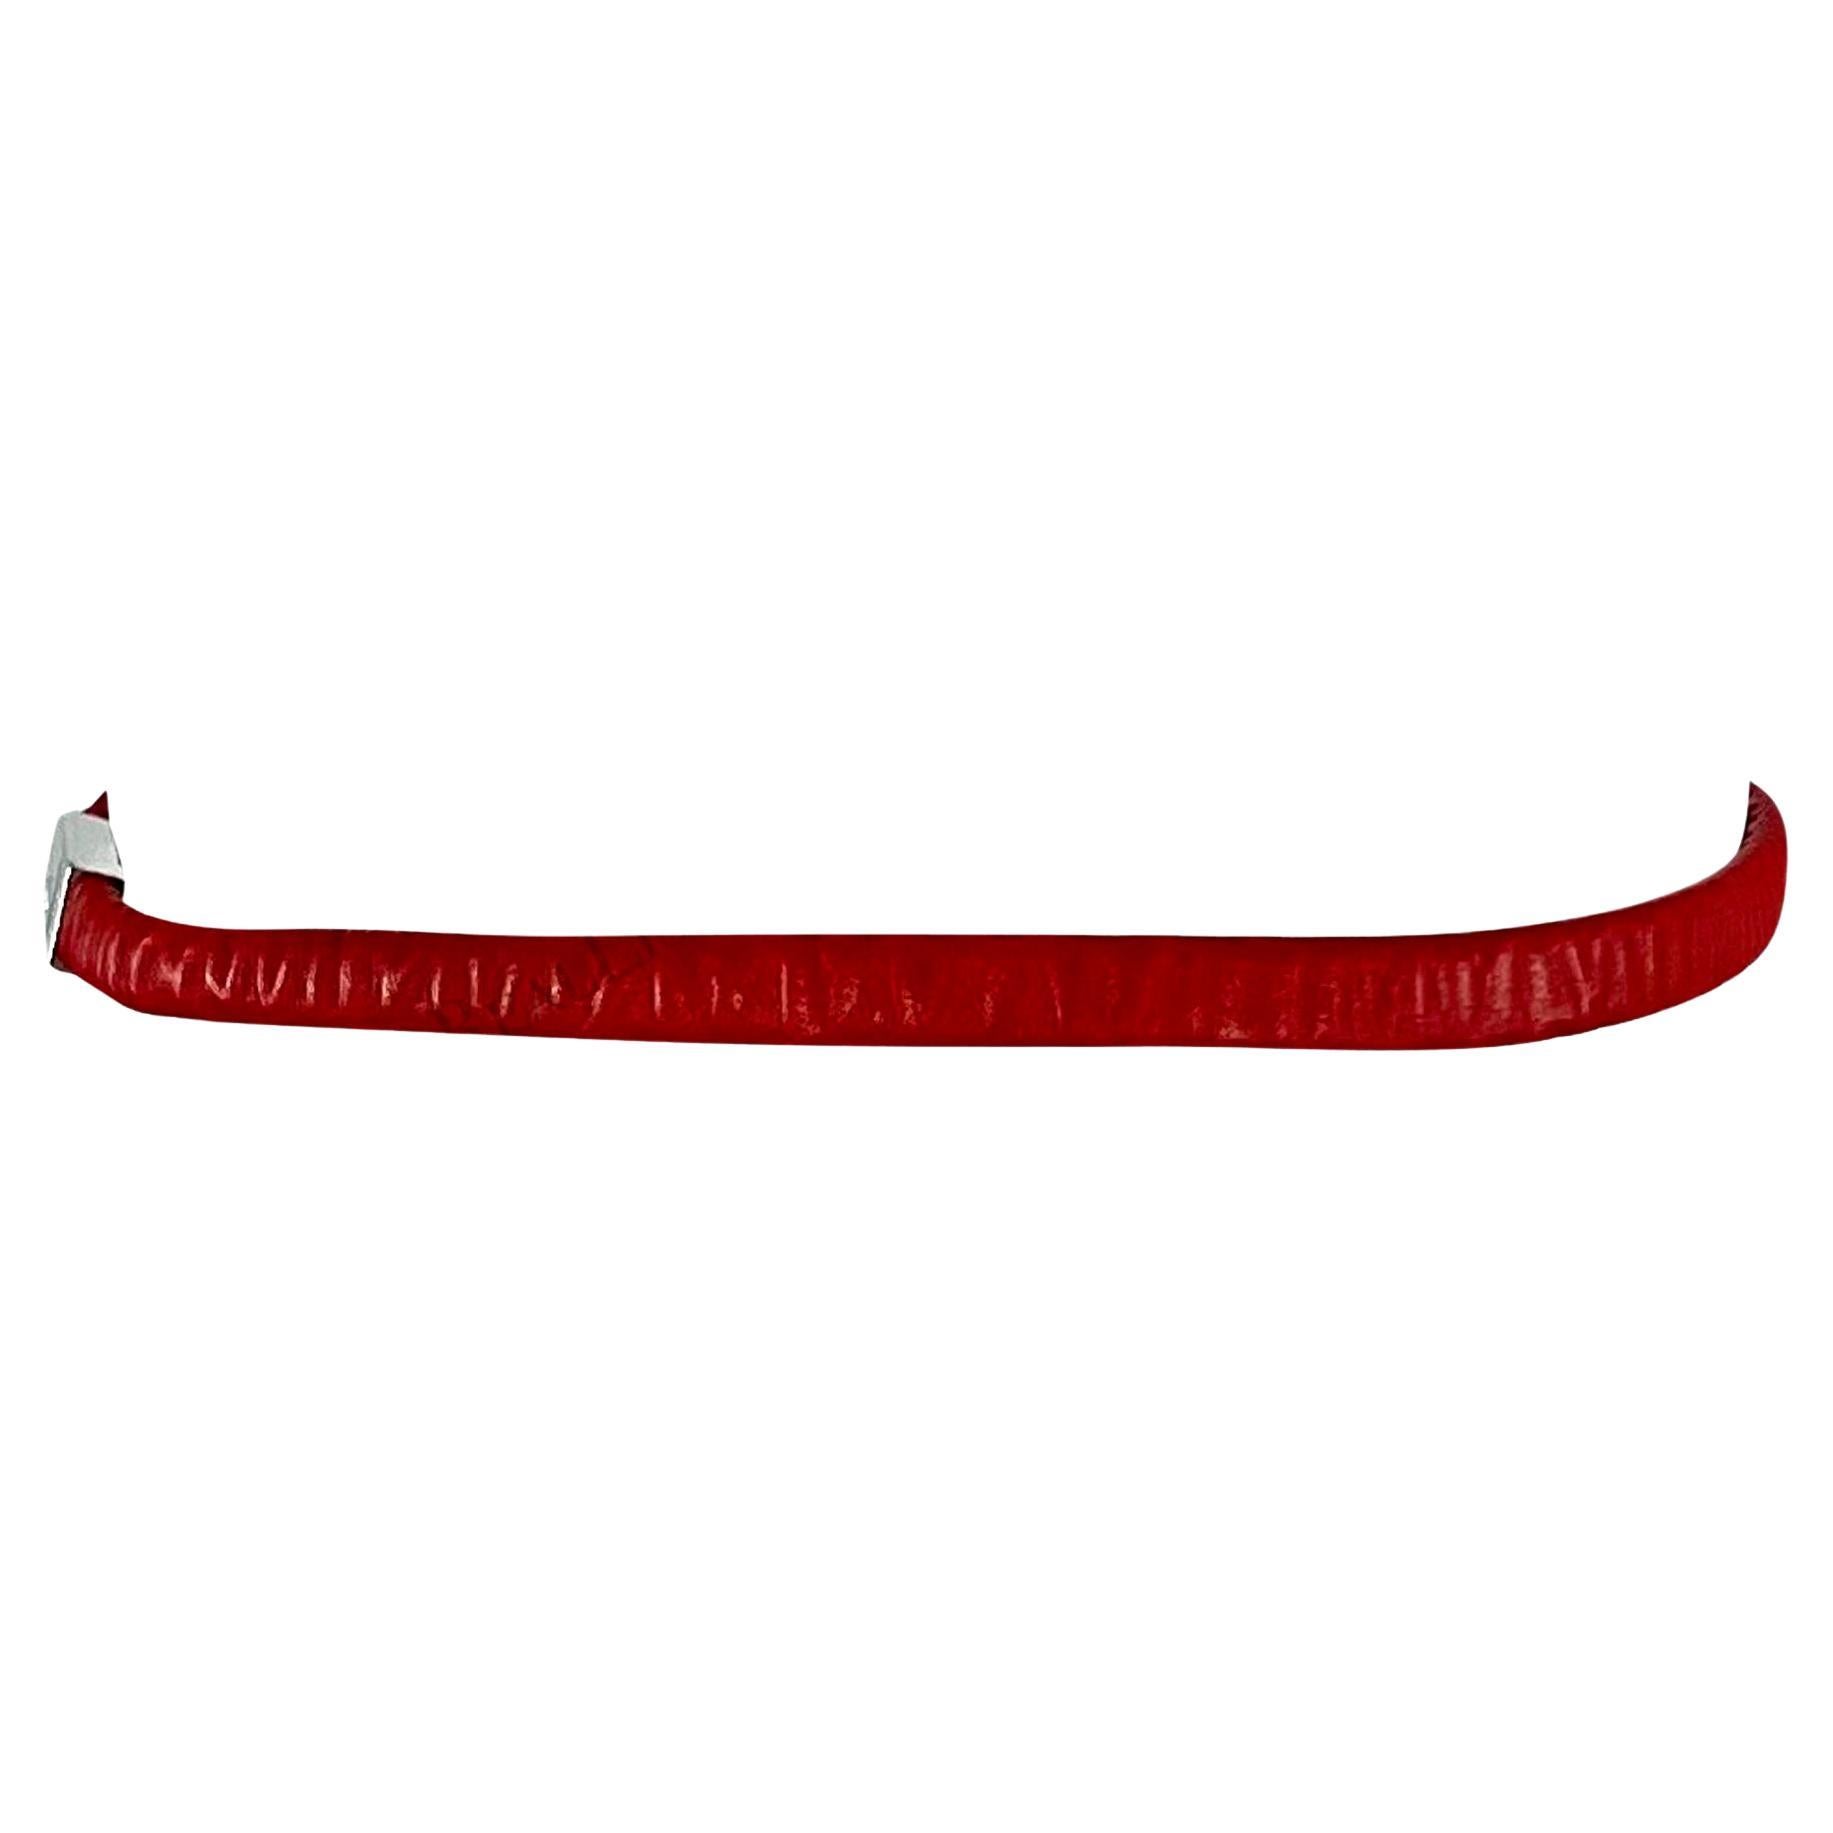 S/S 1999 Gucci by Tom Ford Runway Elasticized Red Leather Logo Thin Belt For Sale 3